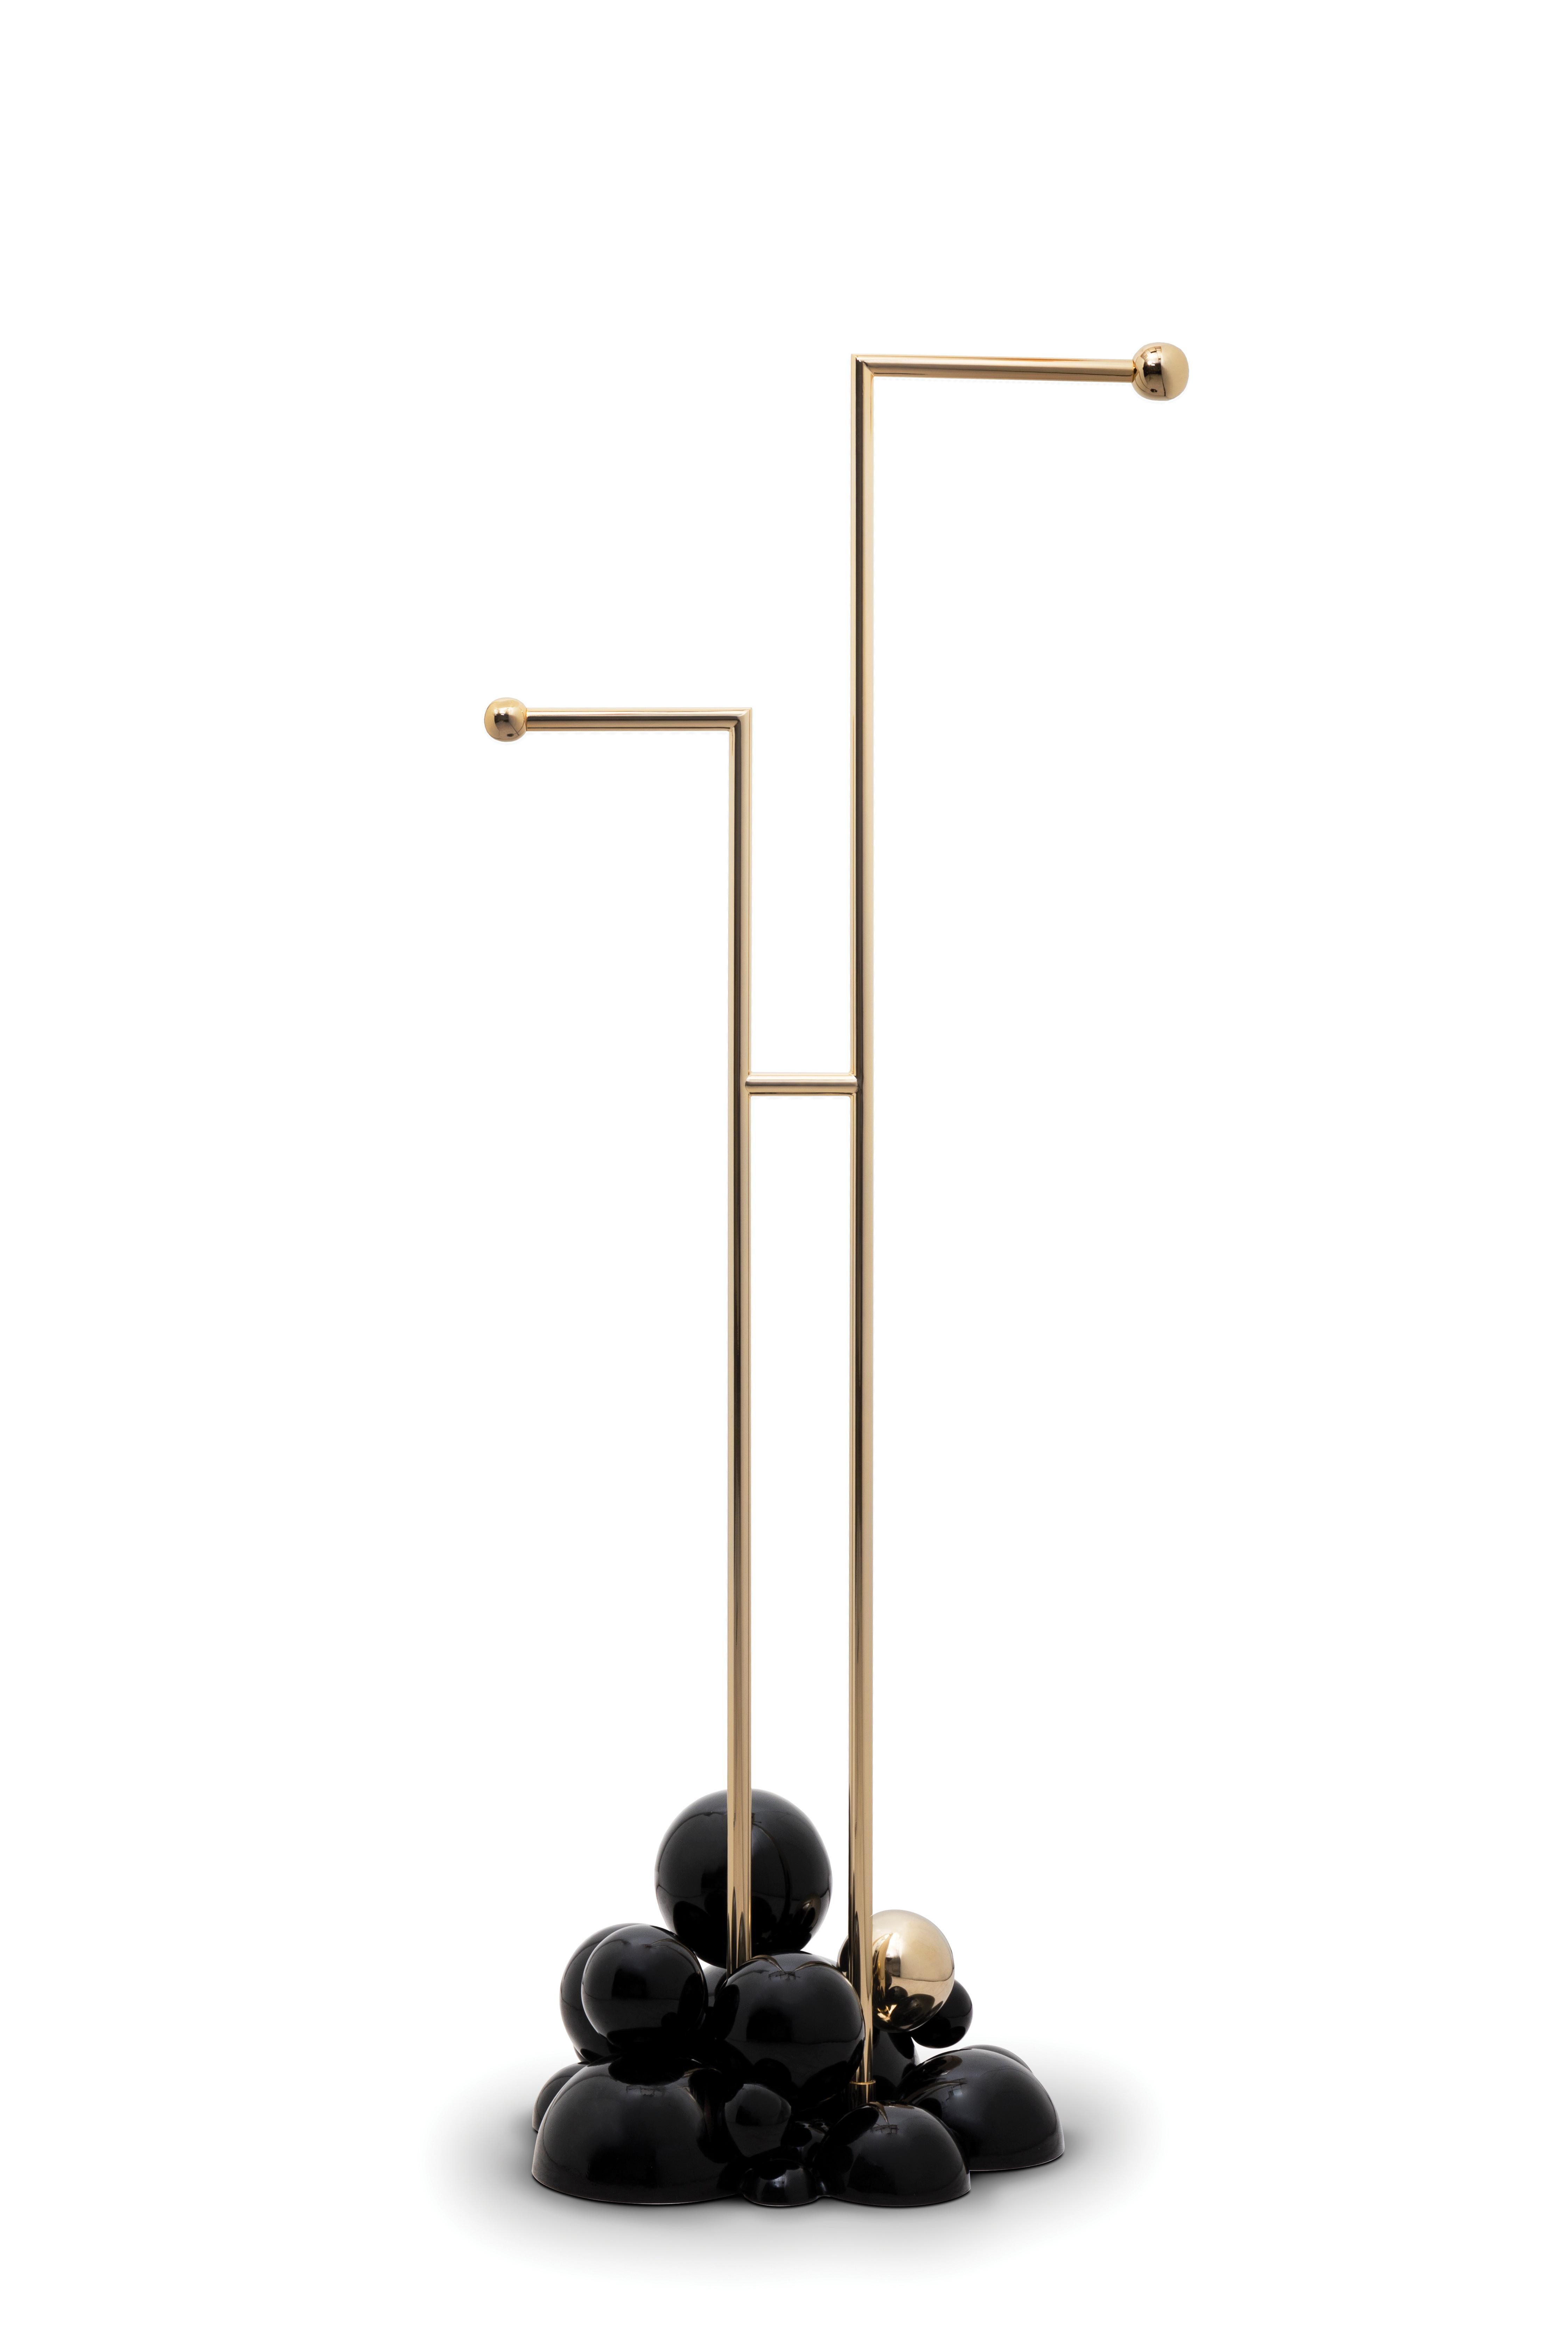 Newton is a three-tier towel rack produced in polished brass and supported by gold and black spheres. It is a revolutionary statement piece created to fulfill the needs of those who are looking for the best in contemporary furniture design mixed